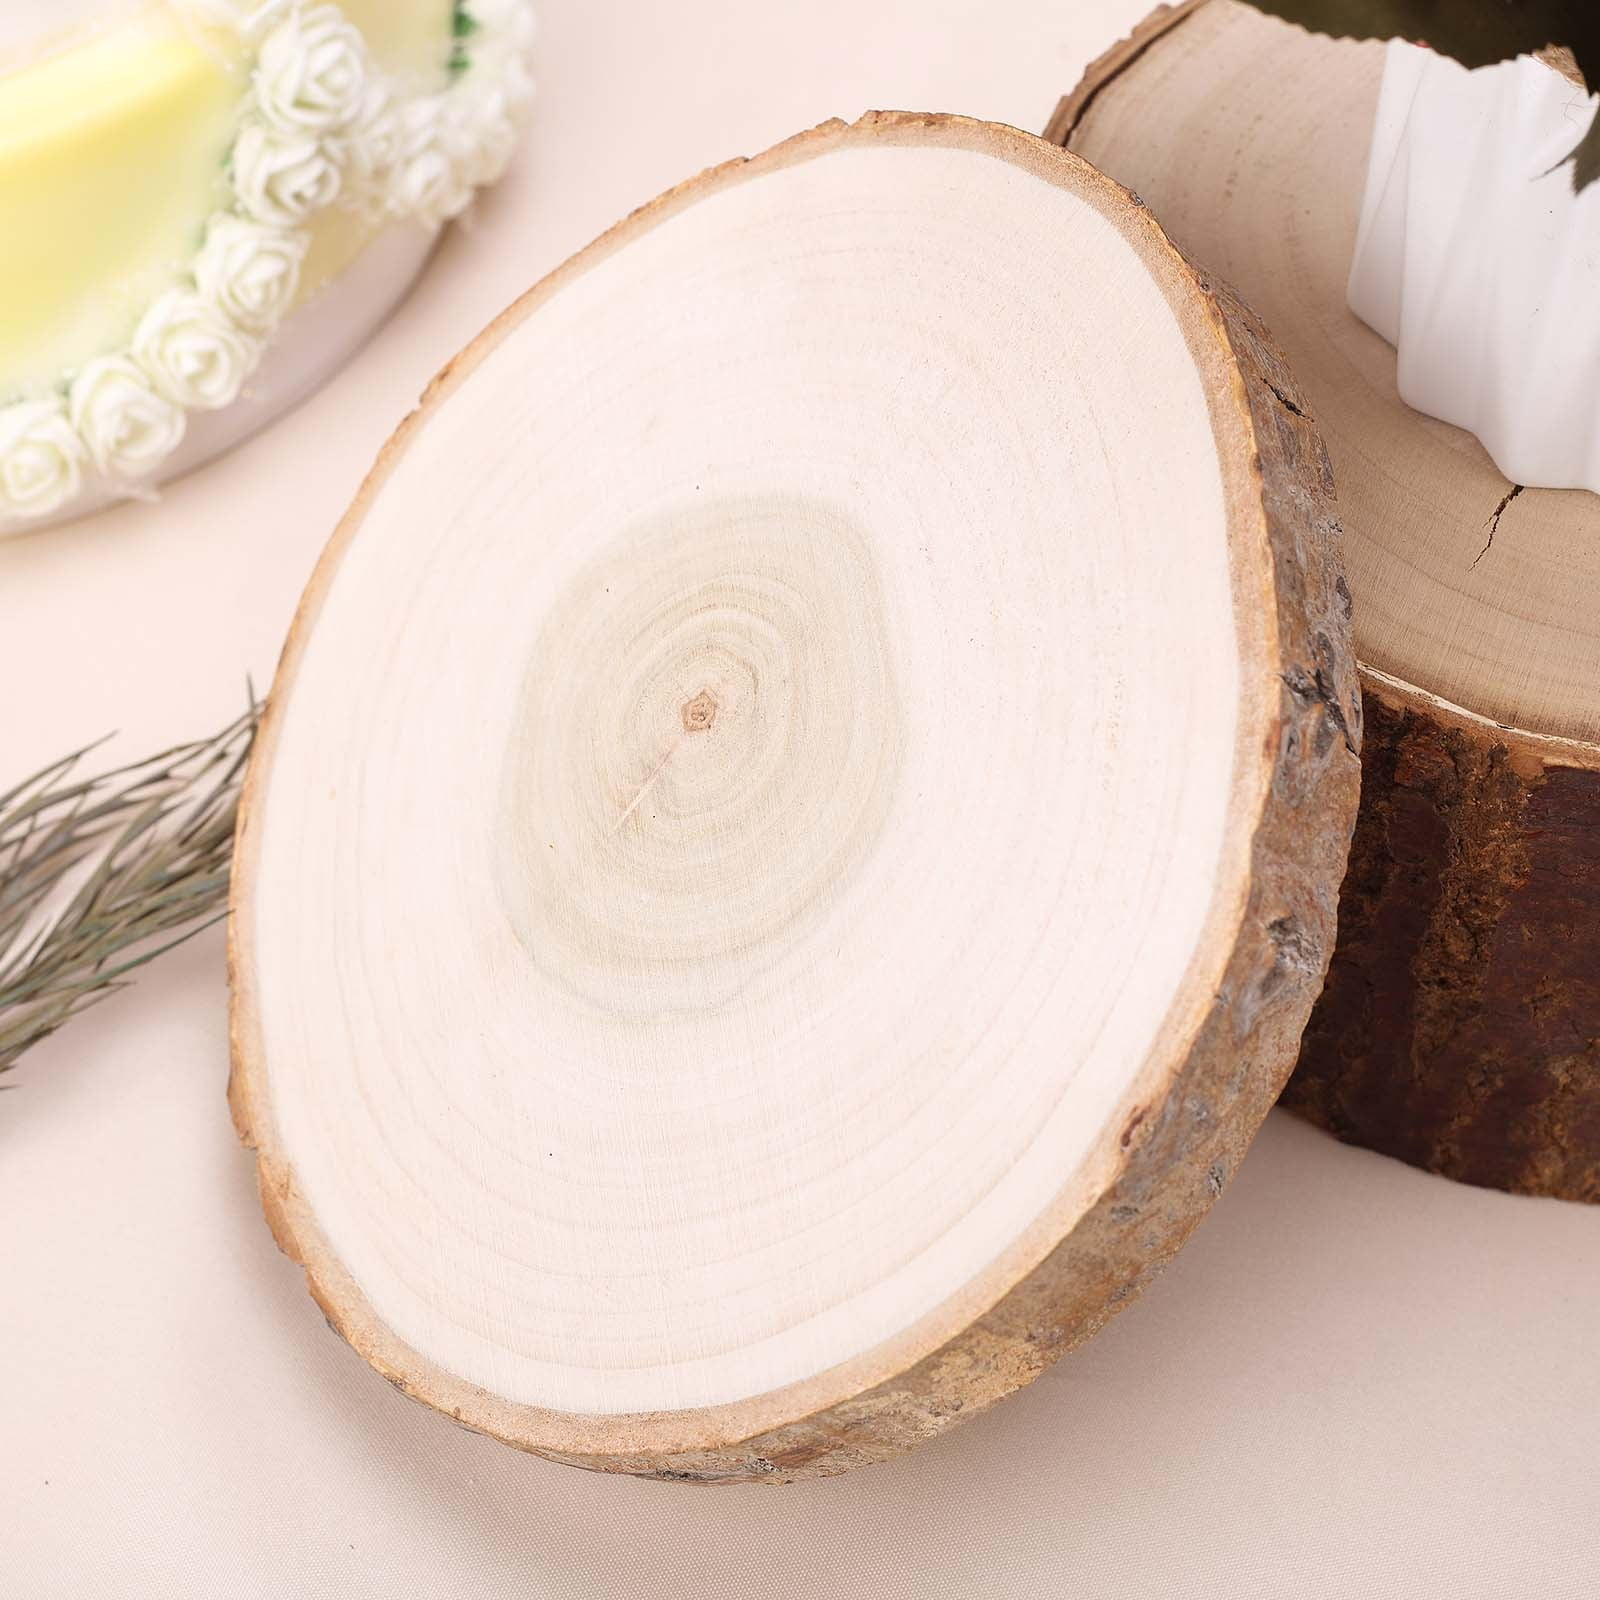 AKOLAFE 10 Pack Natural Wood Slices for Centerpieces Base Rustic Wood Slices for Crafts Large Wood Slice Ornaments Unfinished Wood Rounds Wooden